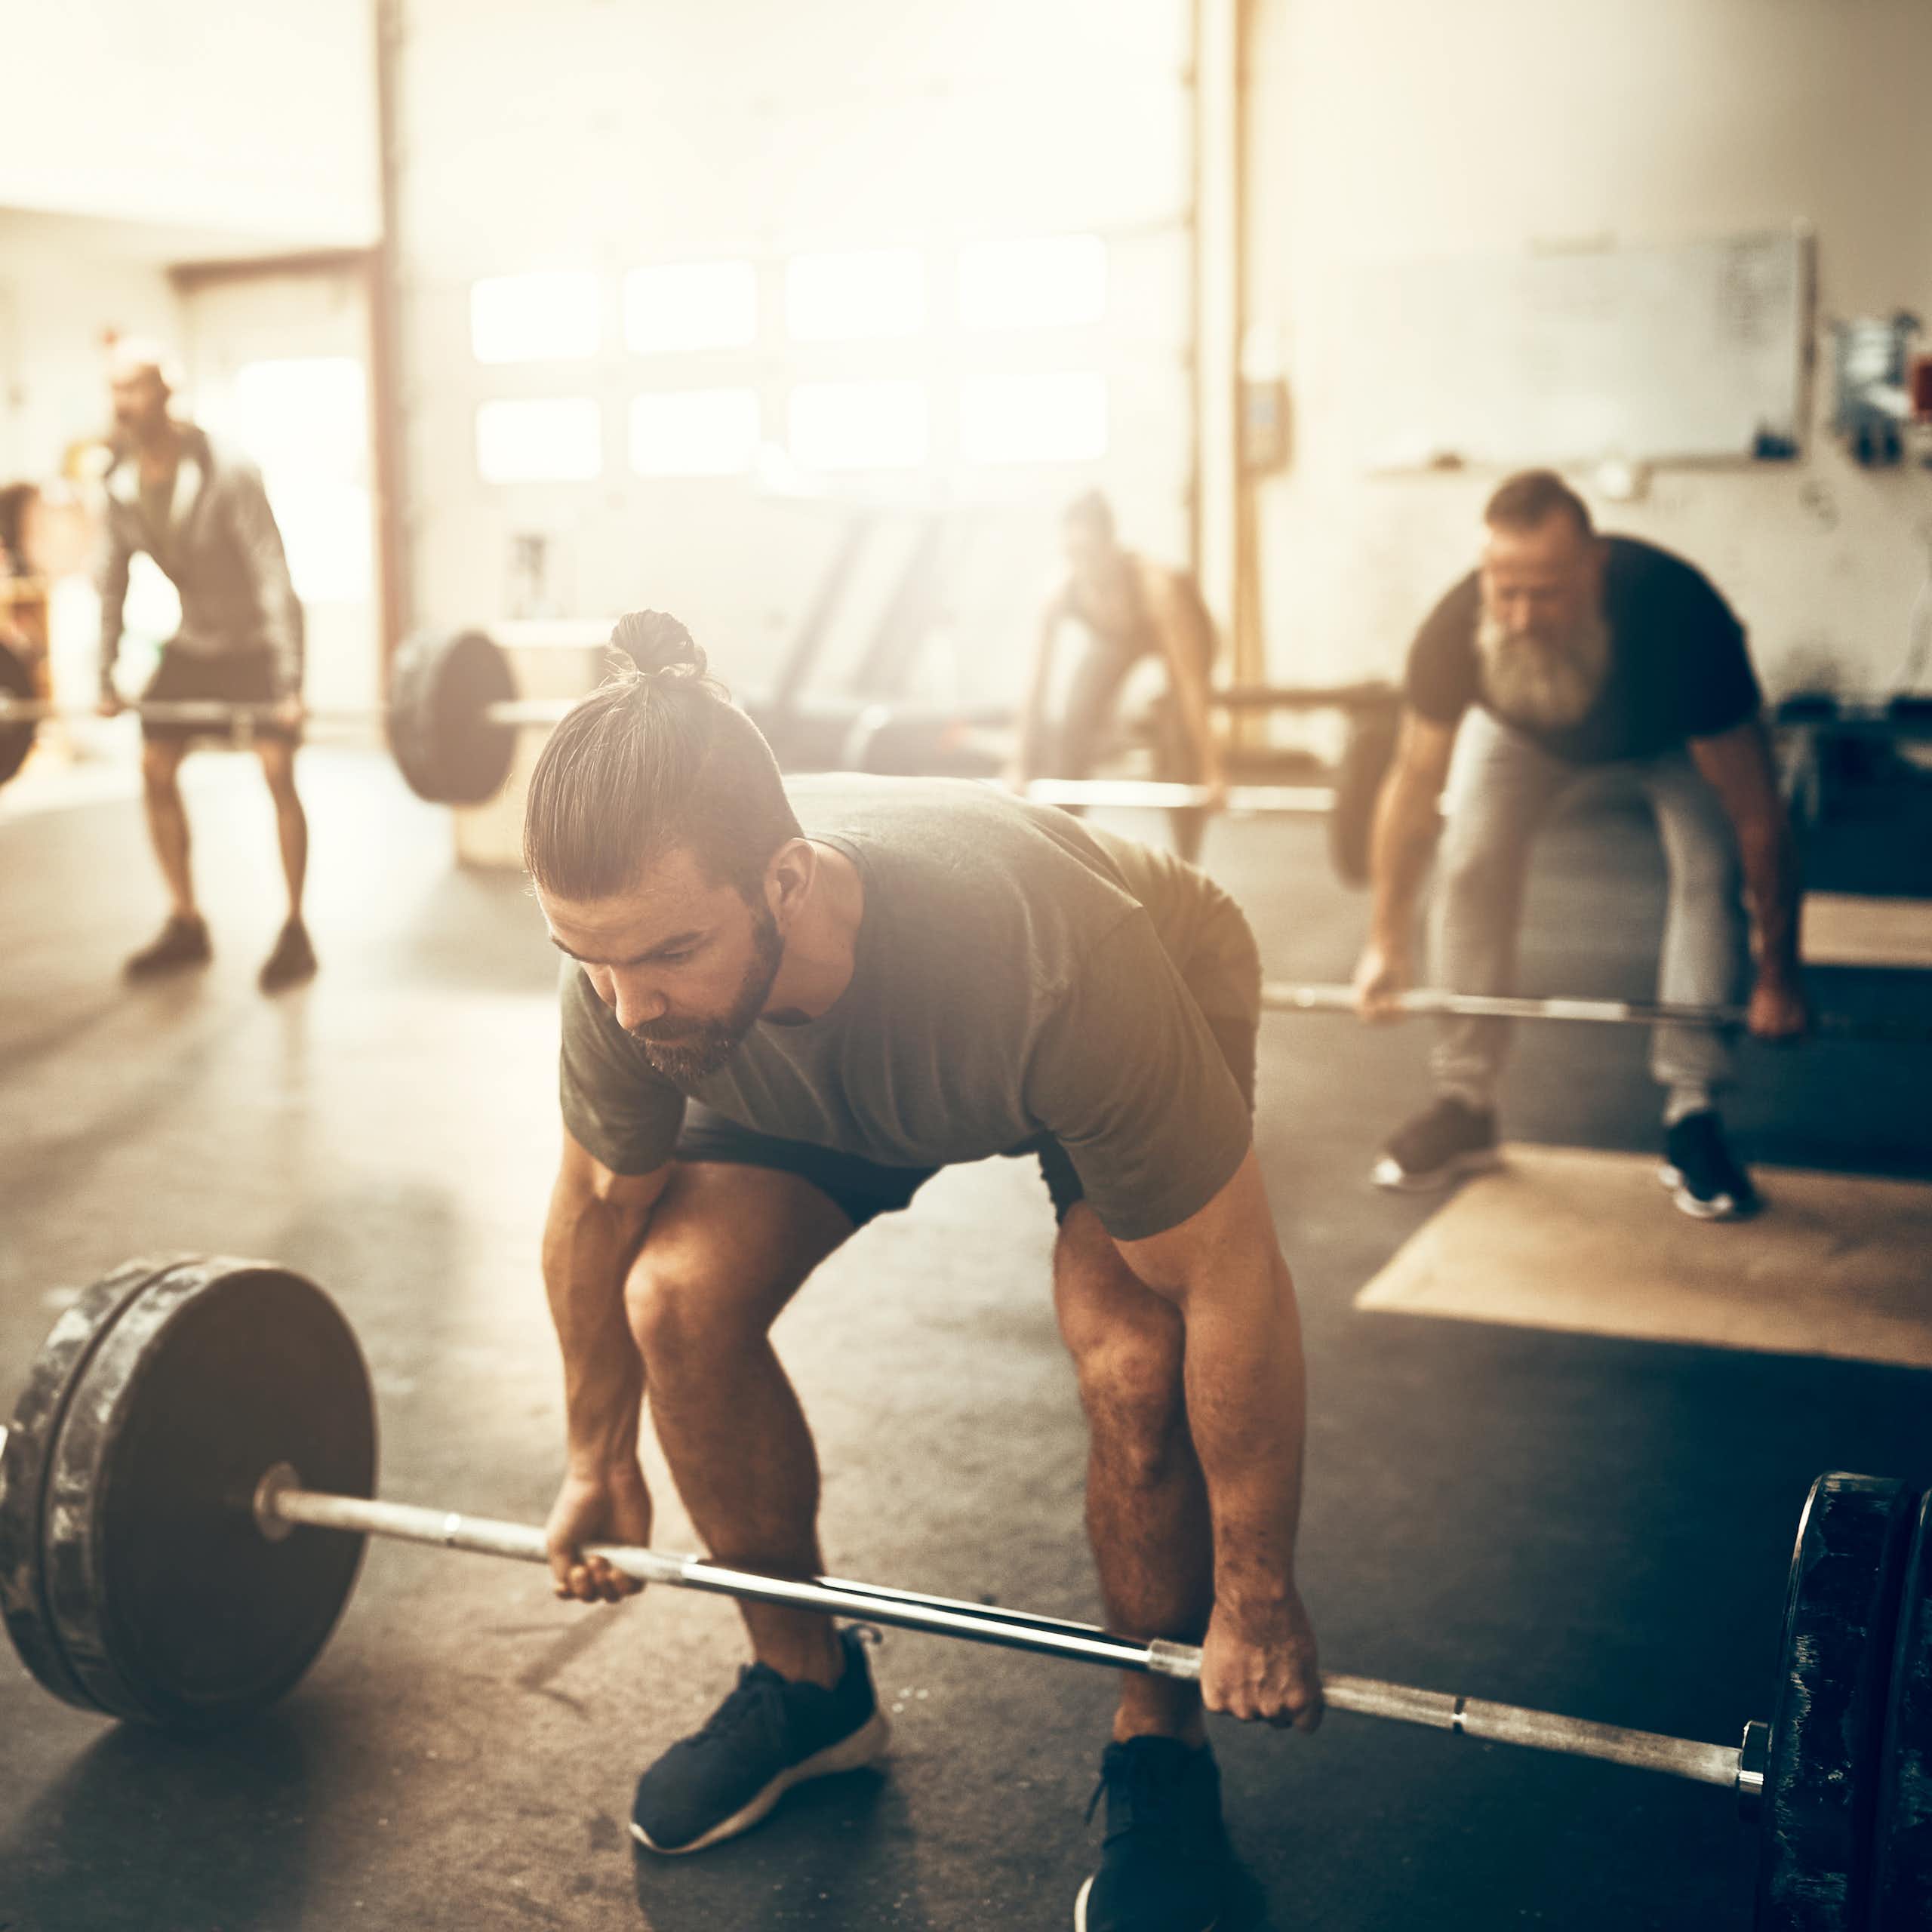 A class of people prepare to do deadlifts in the gym.